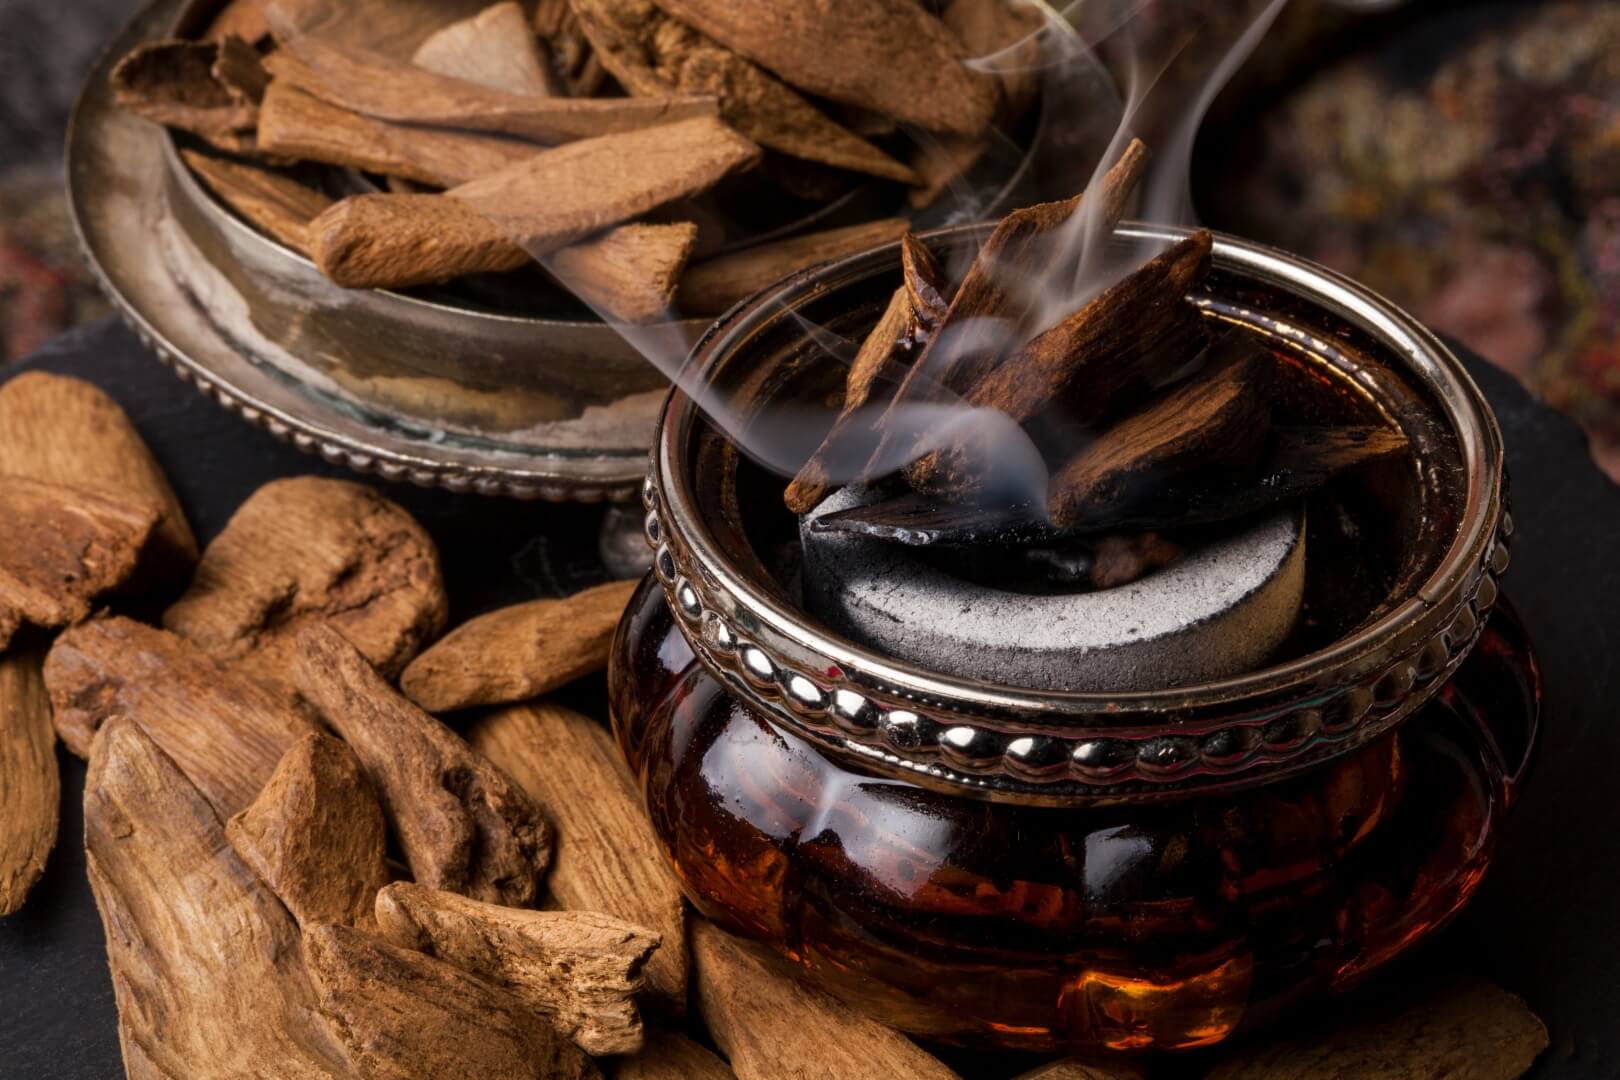 NamoMonk oudh being burned to release aroma